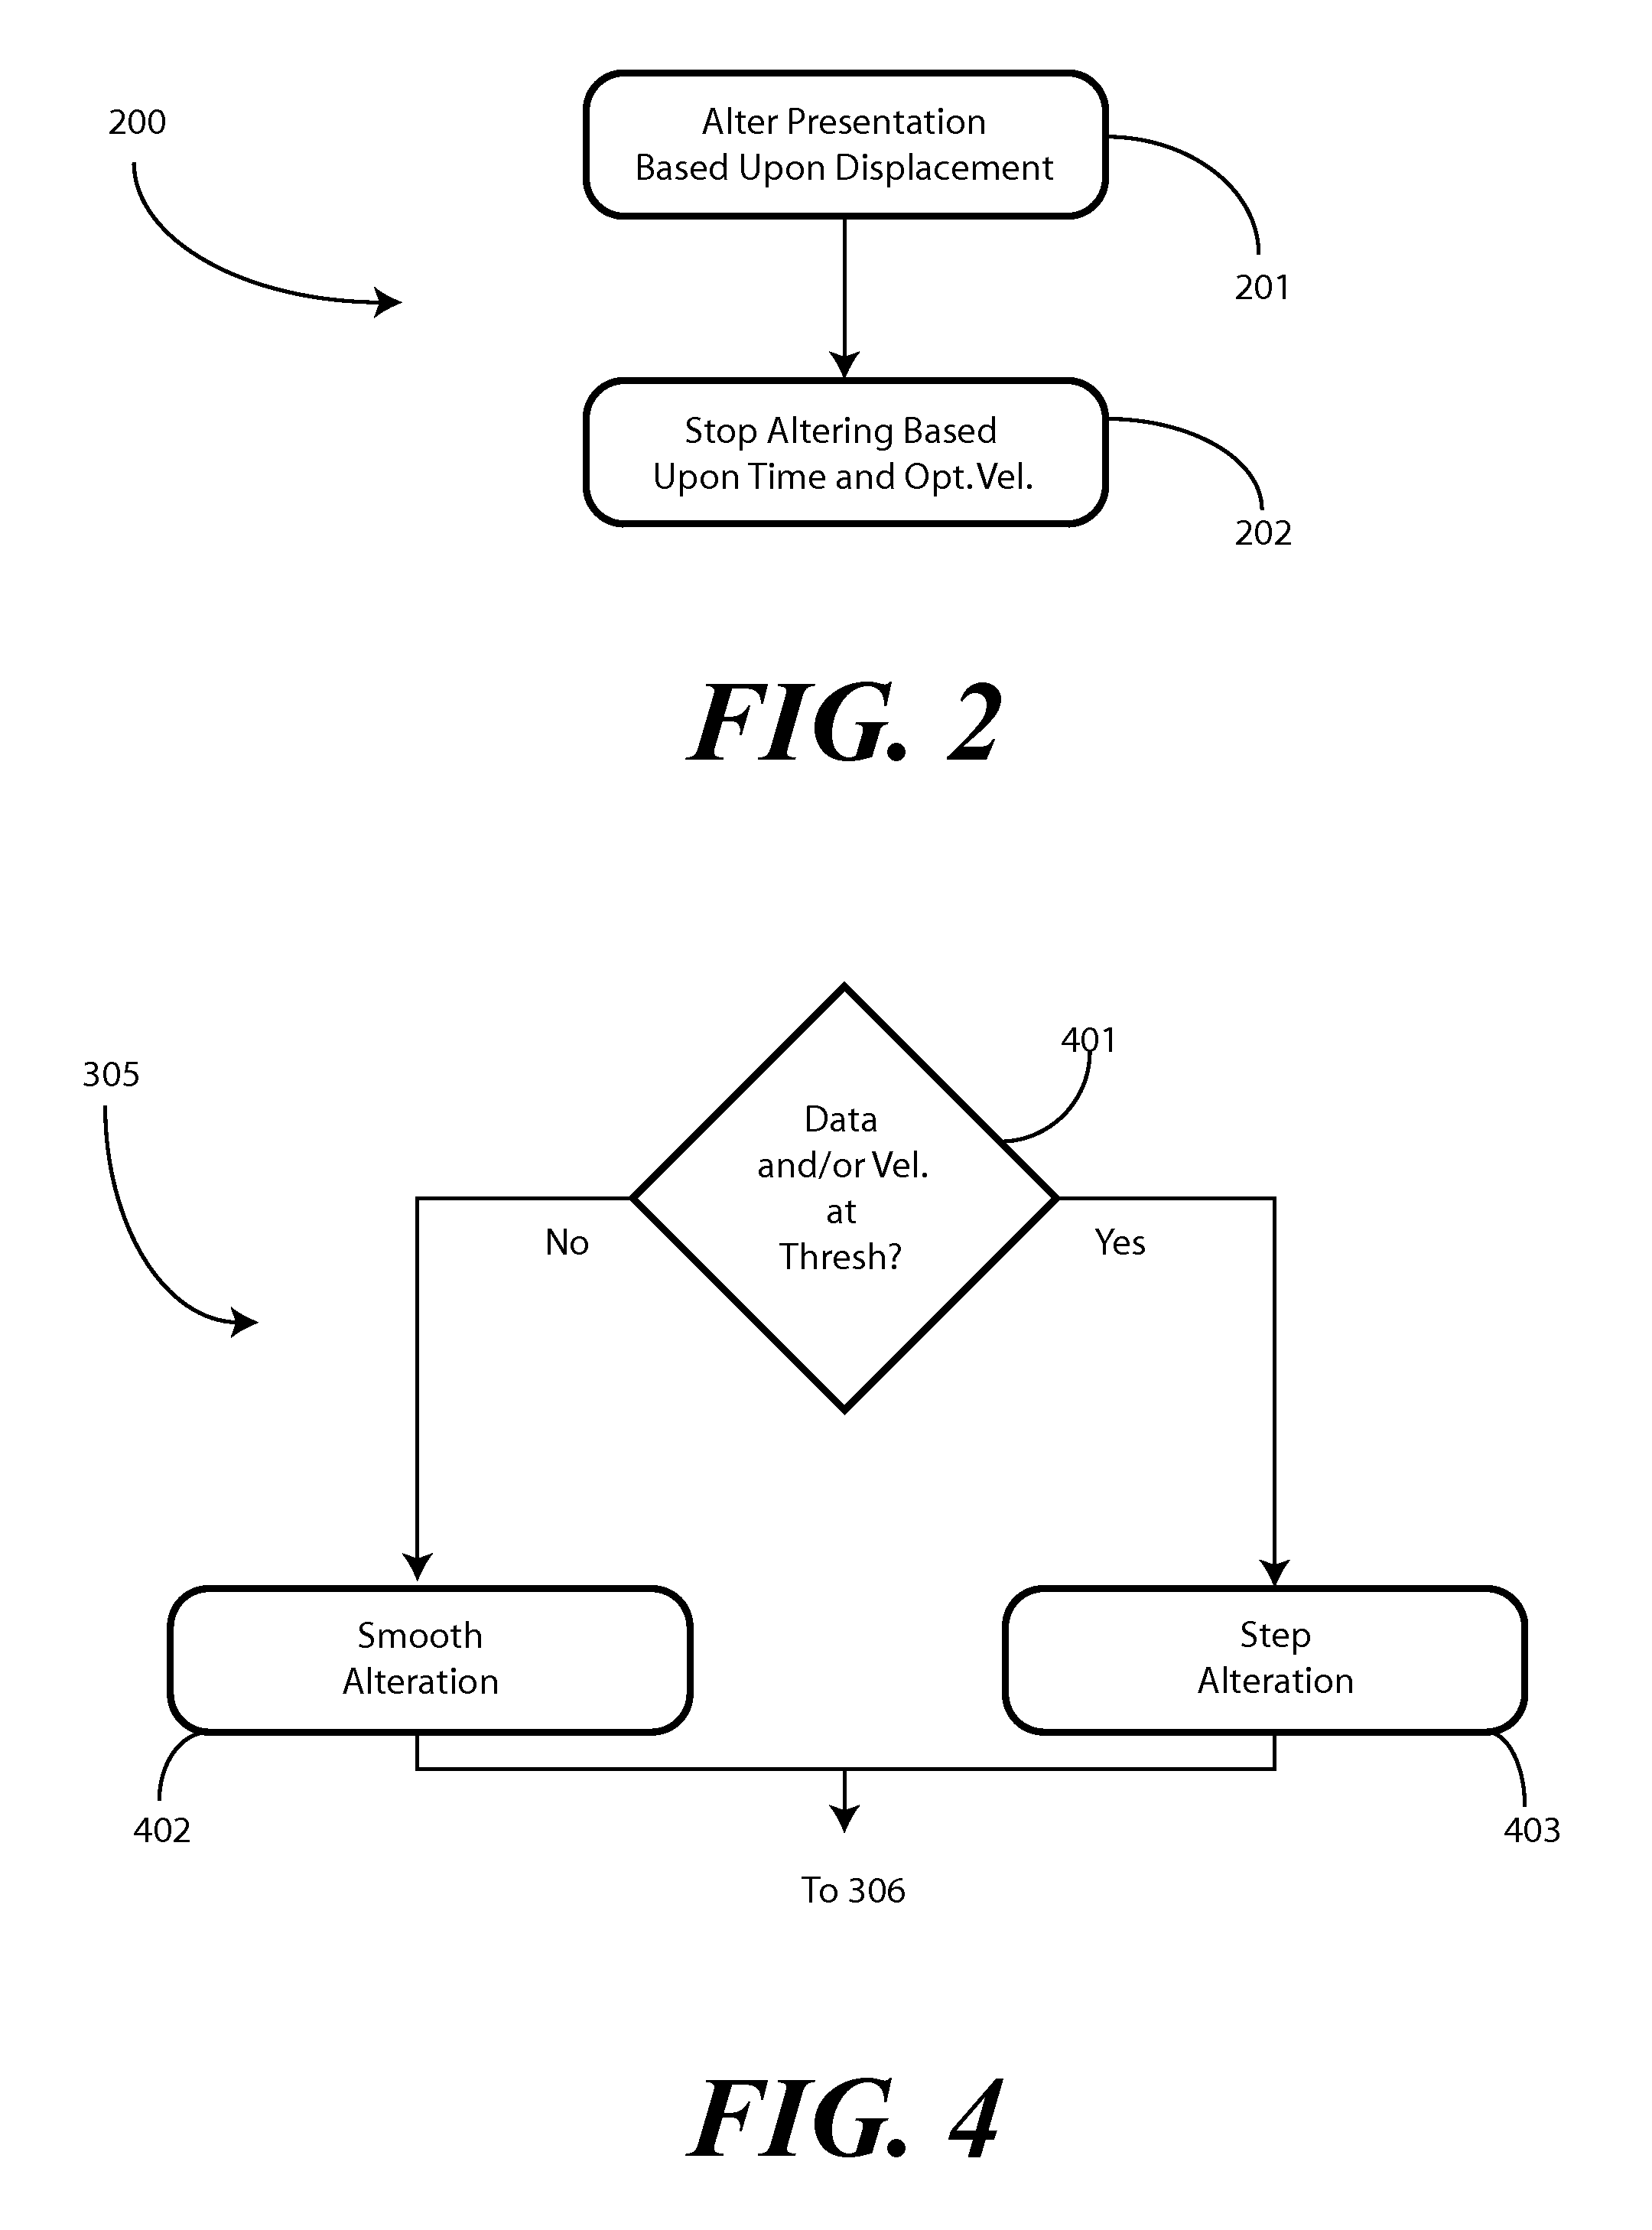 Method and Apparatus for Altering the Presentation Data Based Upon Displacement and Duration of Contact